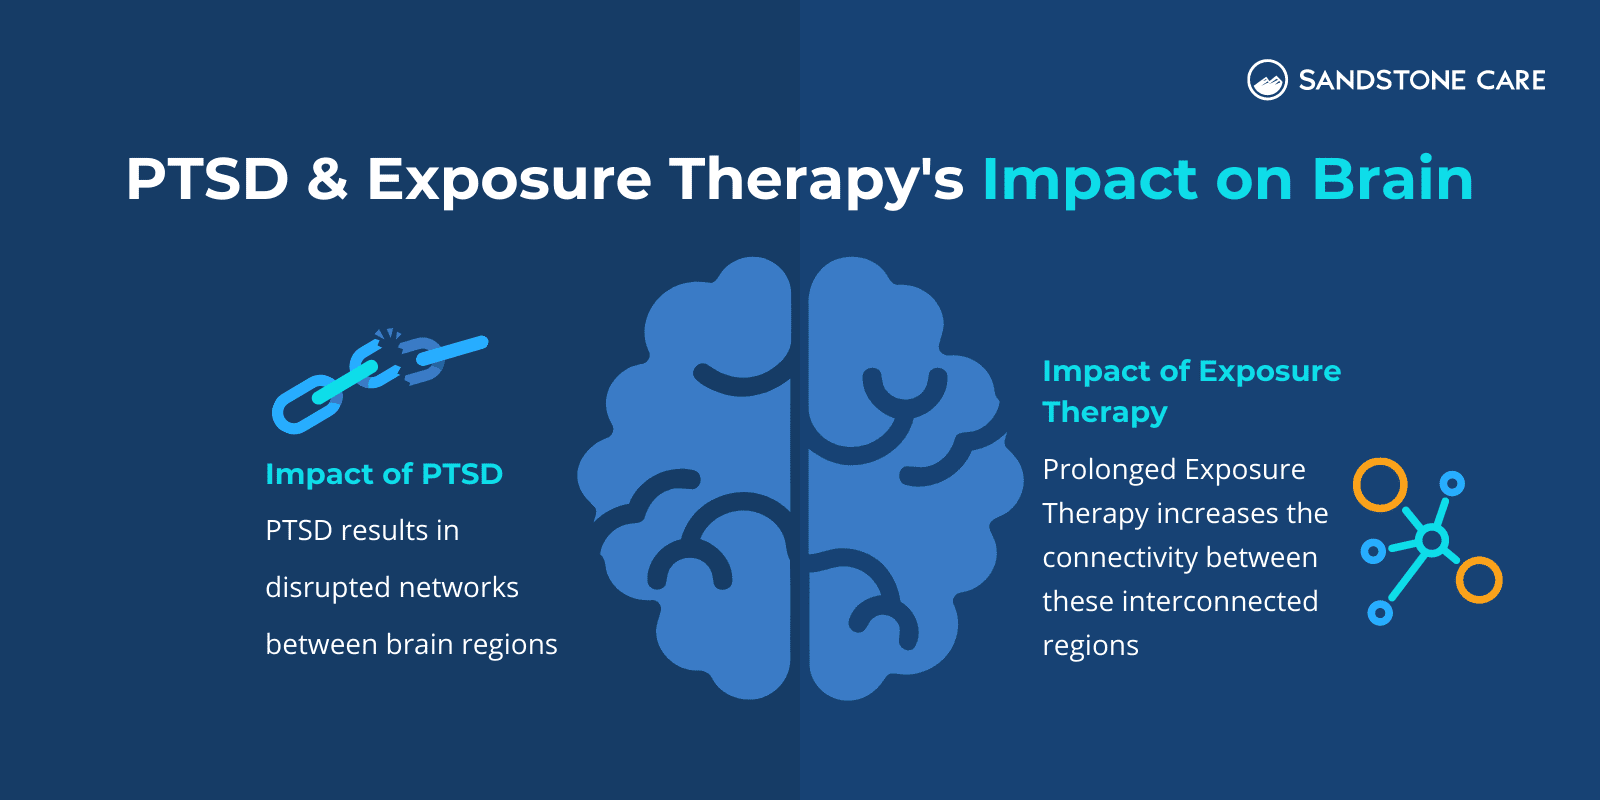 "PTSD And Exposure Therapy's Impact On Brain" written above the brain graphic in the center while impact of PTSD is illustrated on the left and impact of exposure therapy is illustrated on the right of the brain